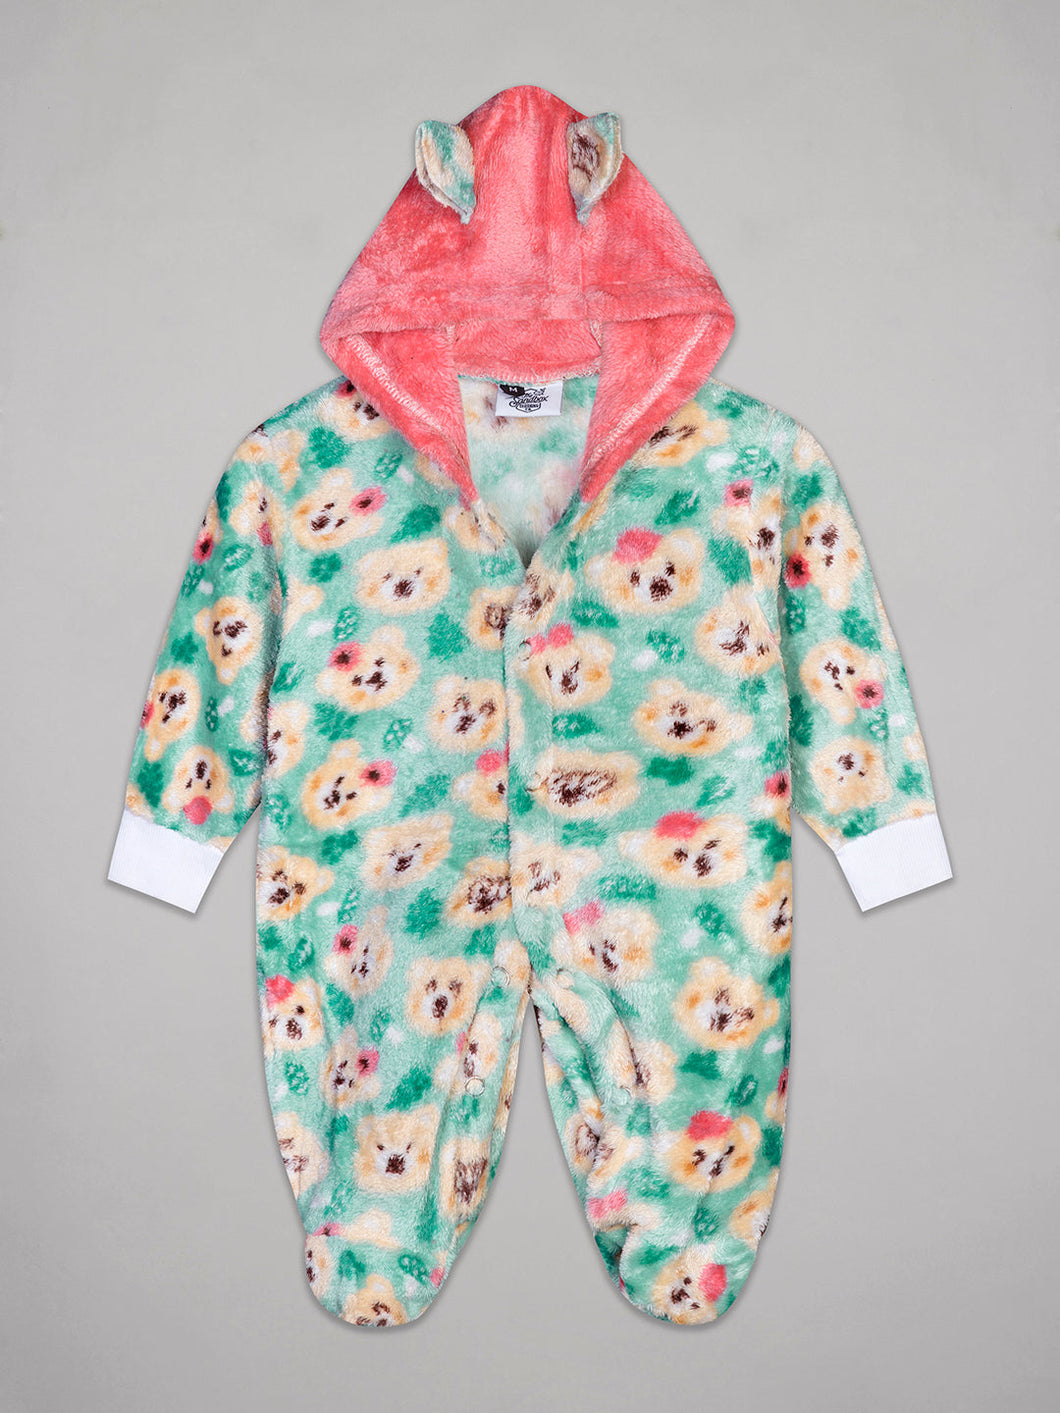 The Sandbox Clothing Co. Winter Rompers RM284